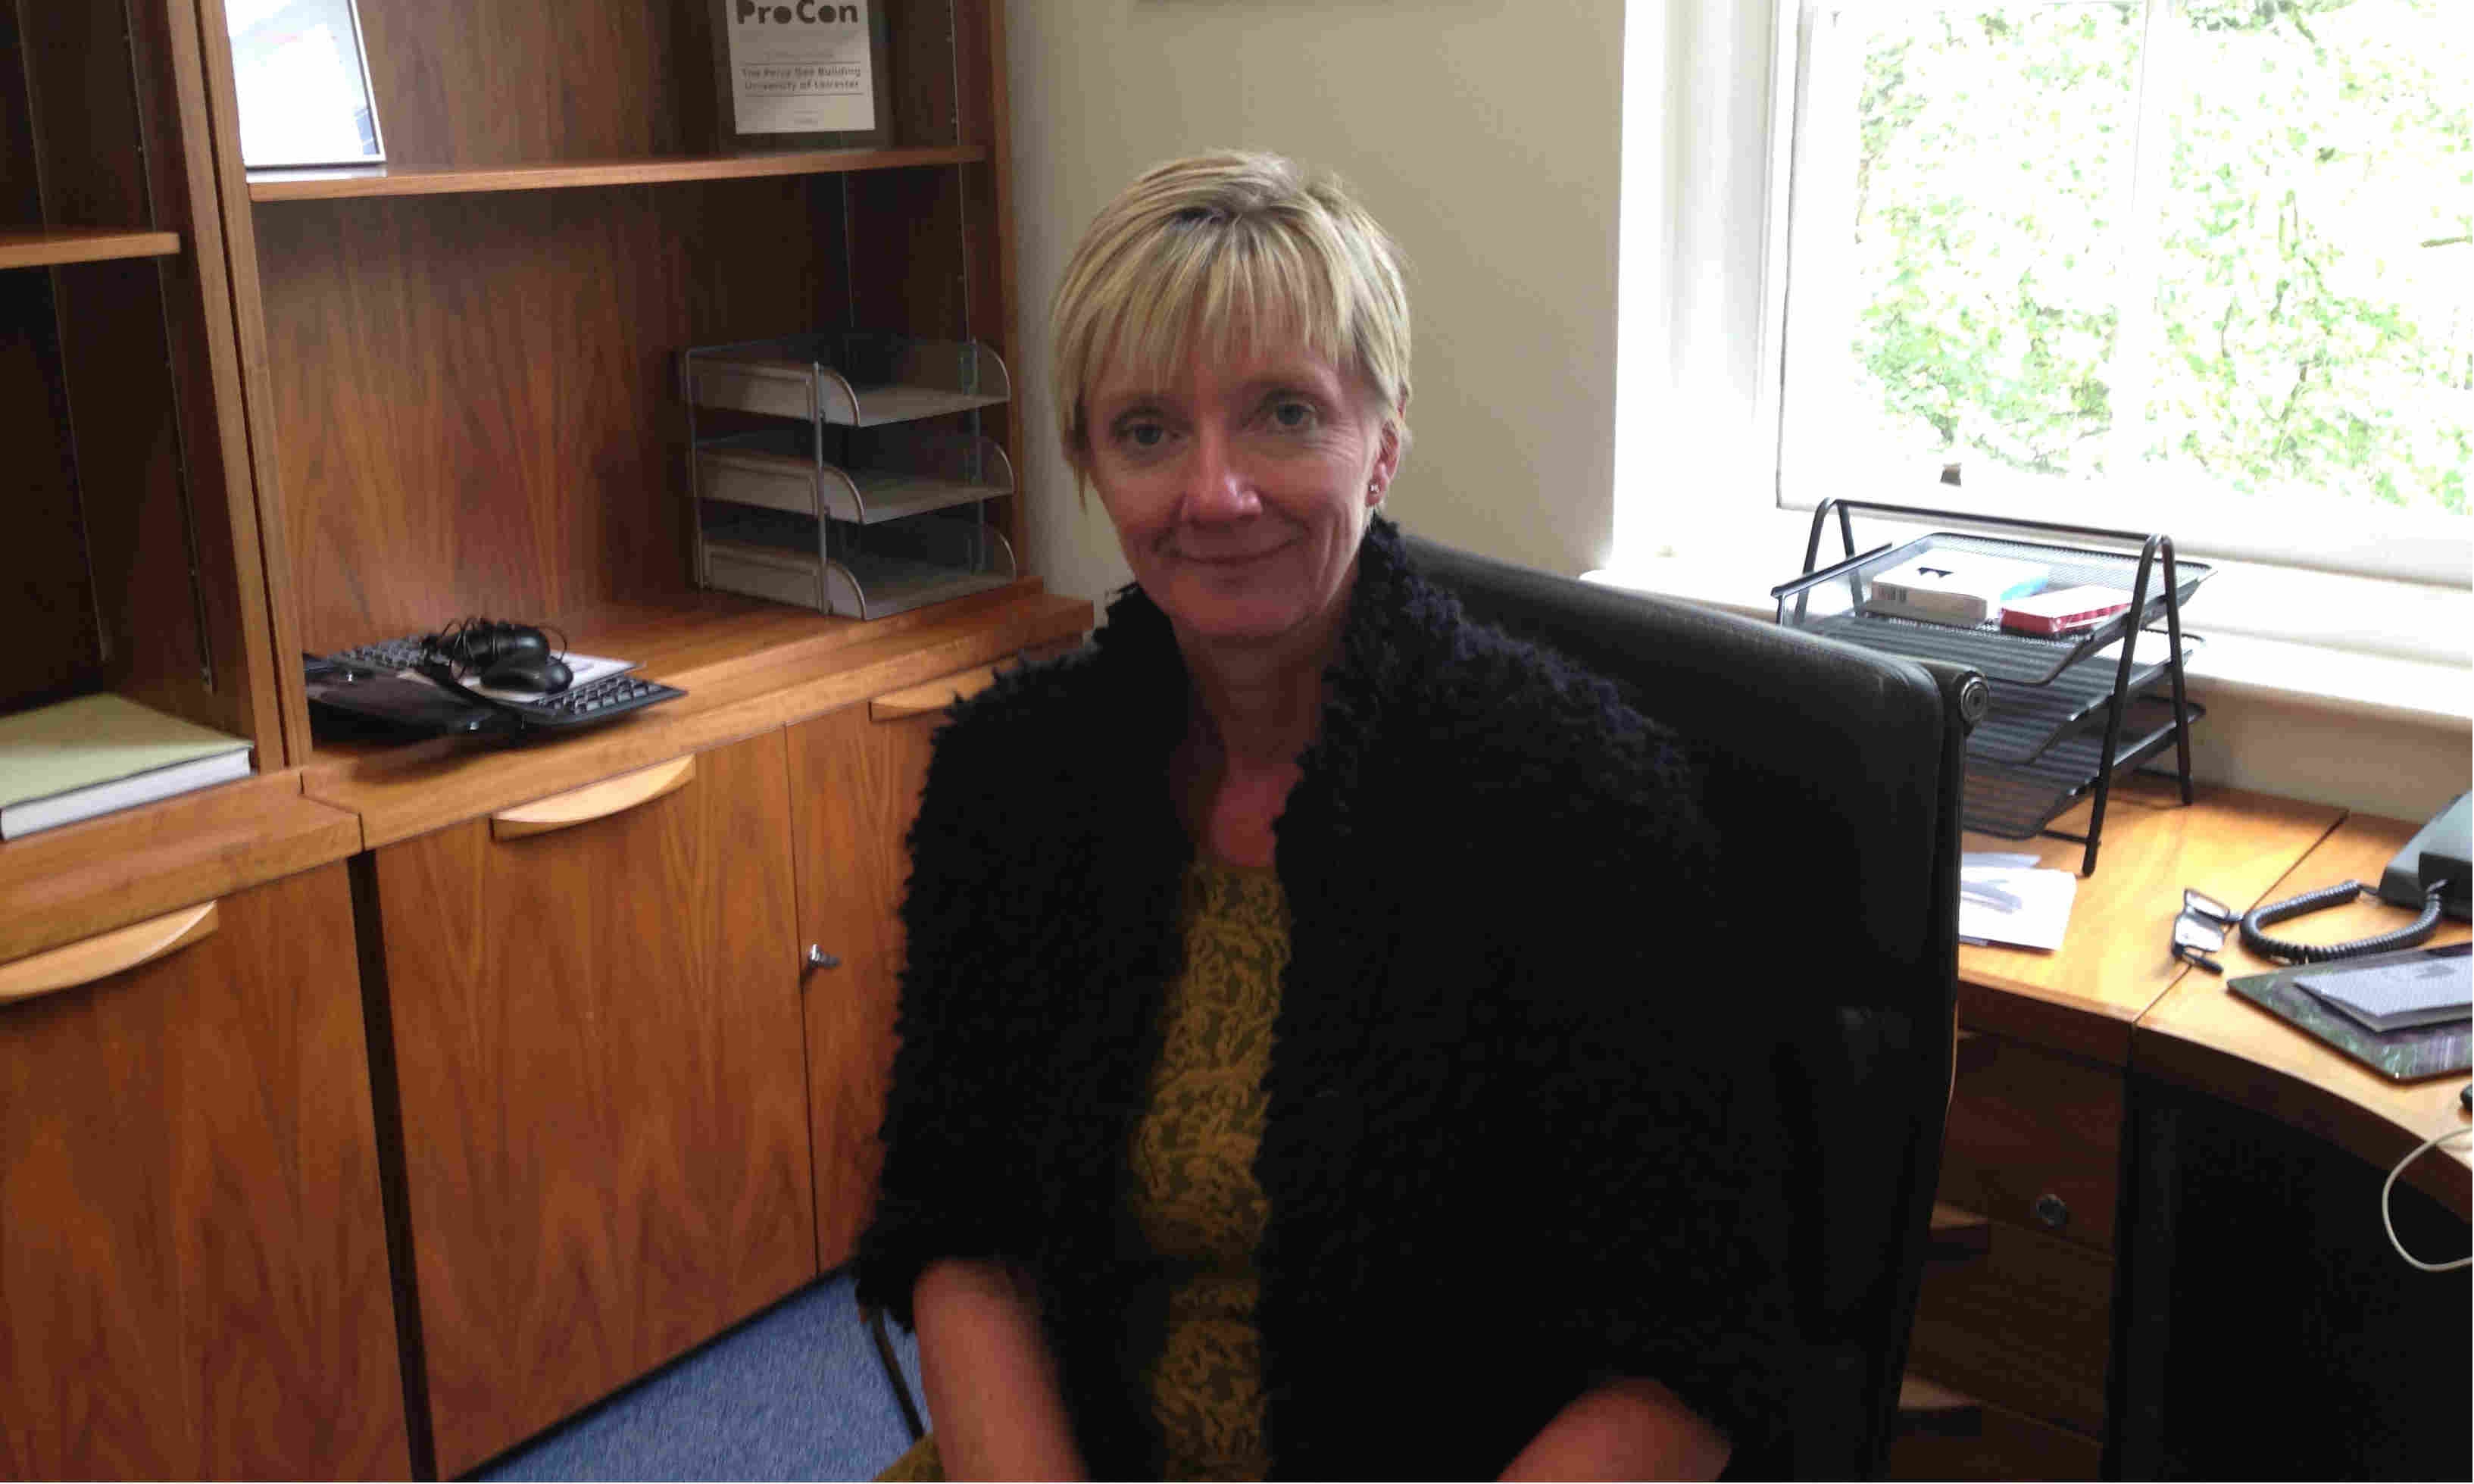 University of Leicester appoints new Director of Estates and Campus Services